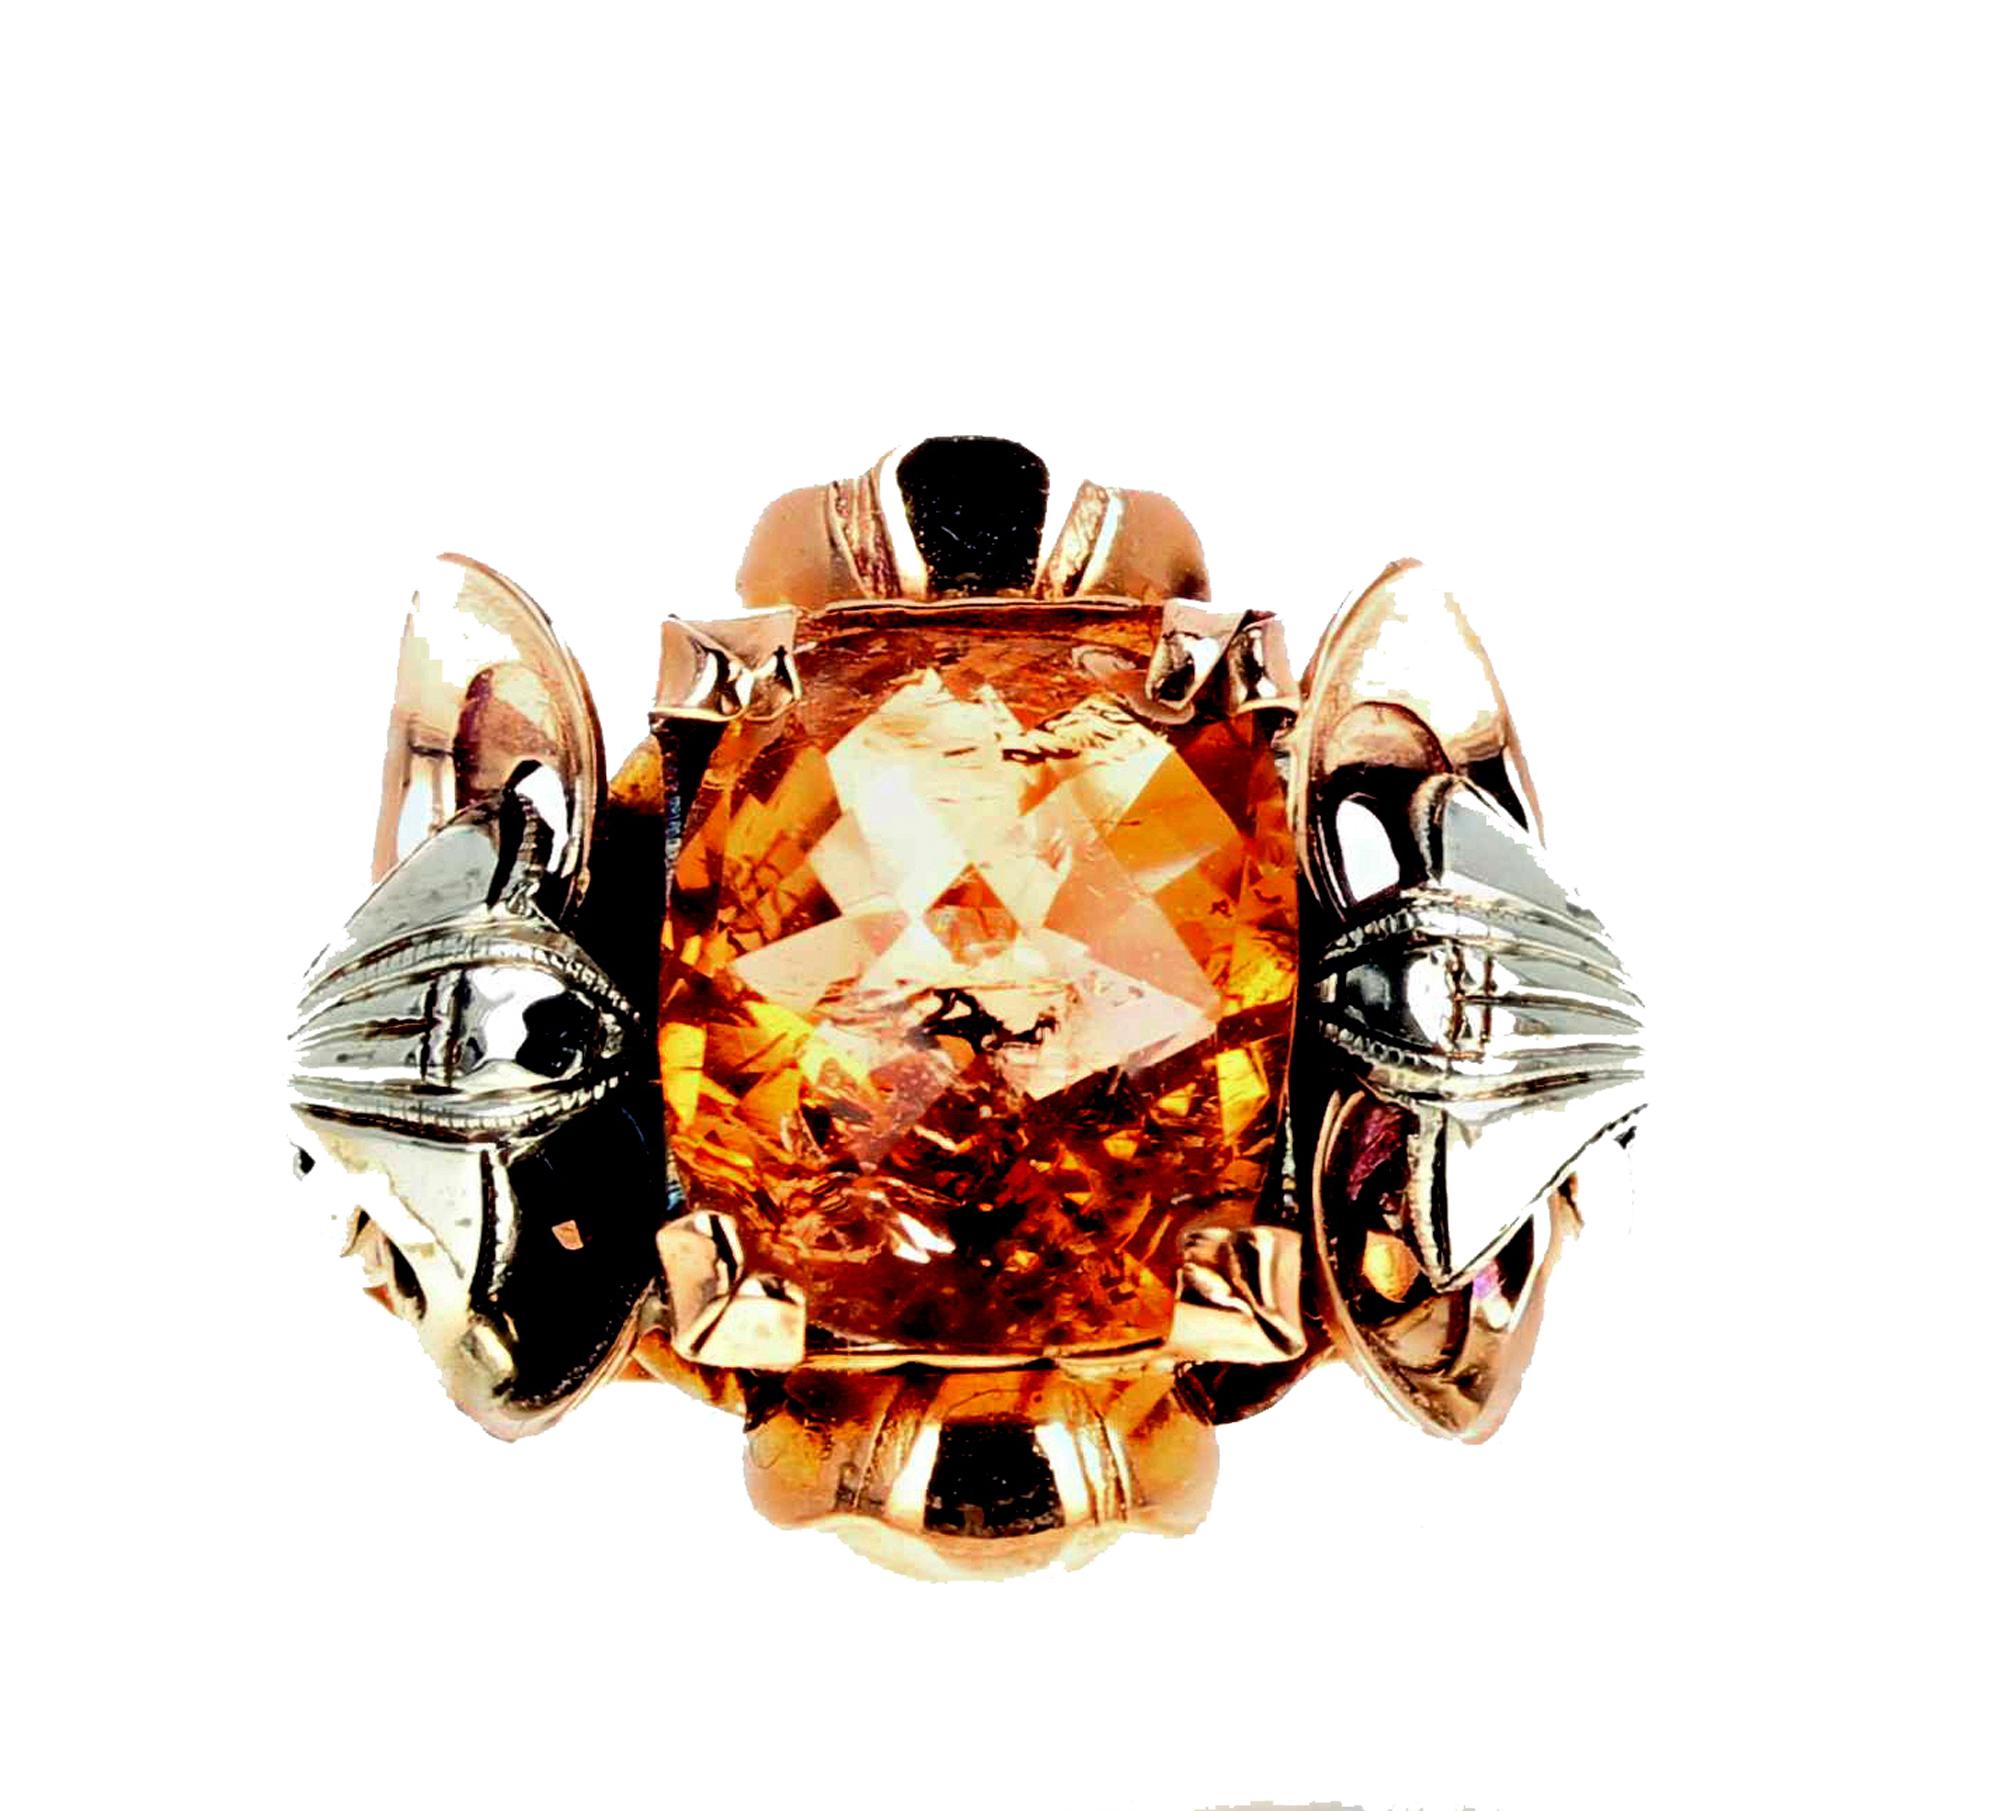 Cushion Cut AJD VERY RARE Golden Glittering 4.95 Ct. REAL IMPERIAL TOPAZ Gold & Silver Ring For Sale